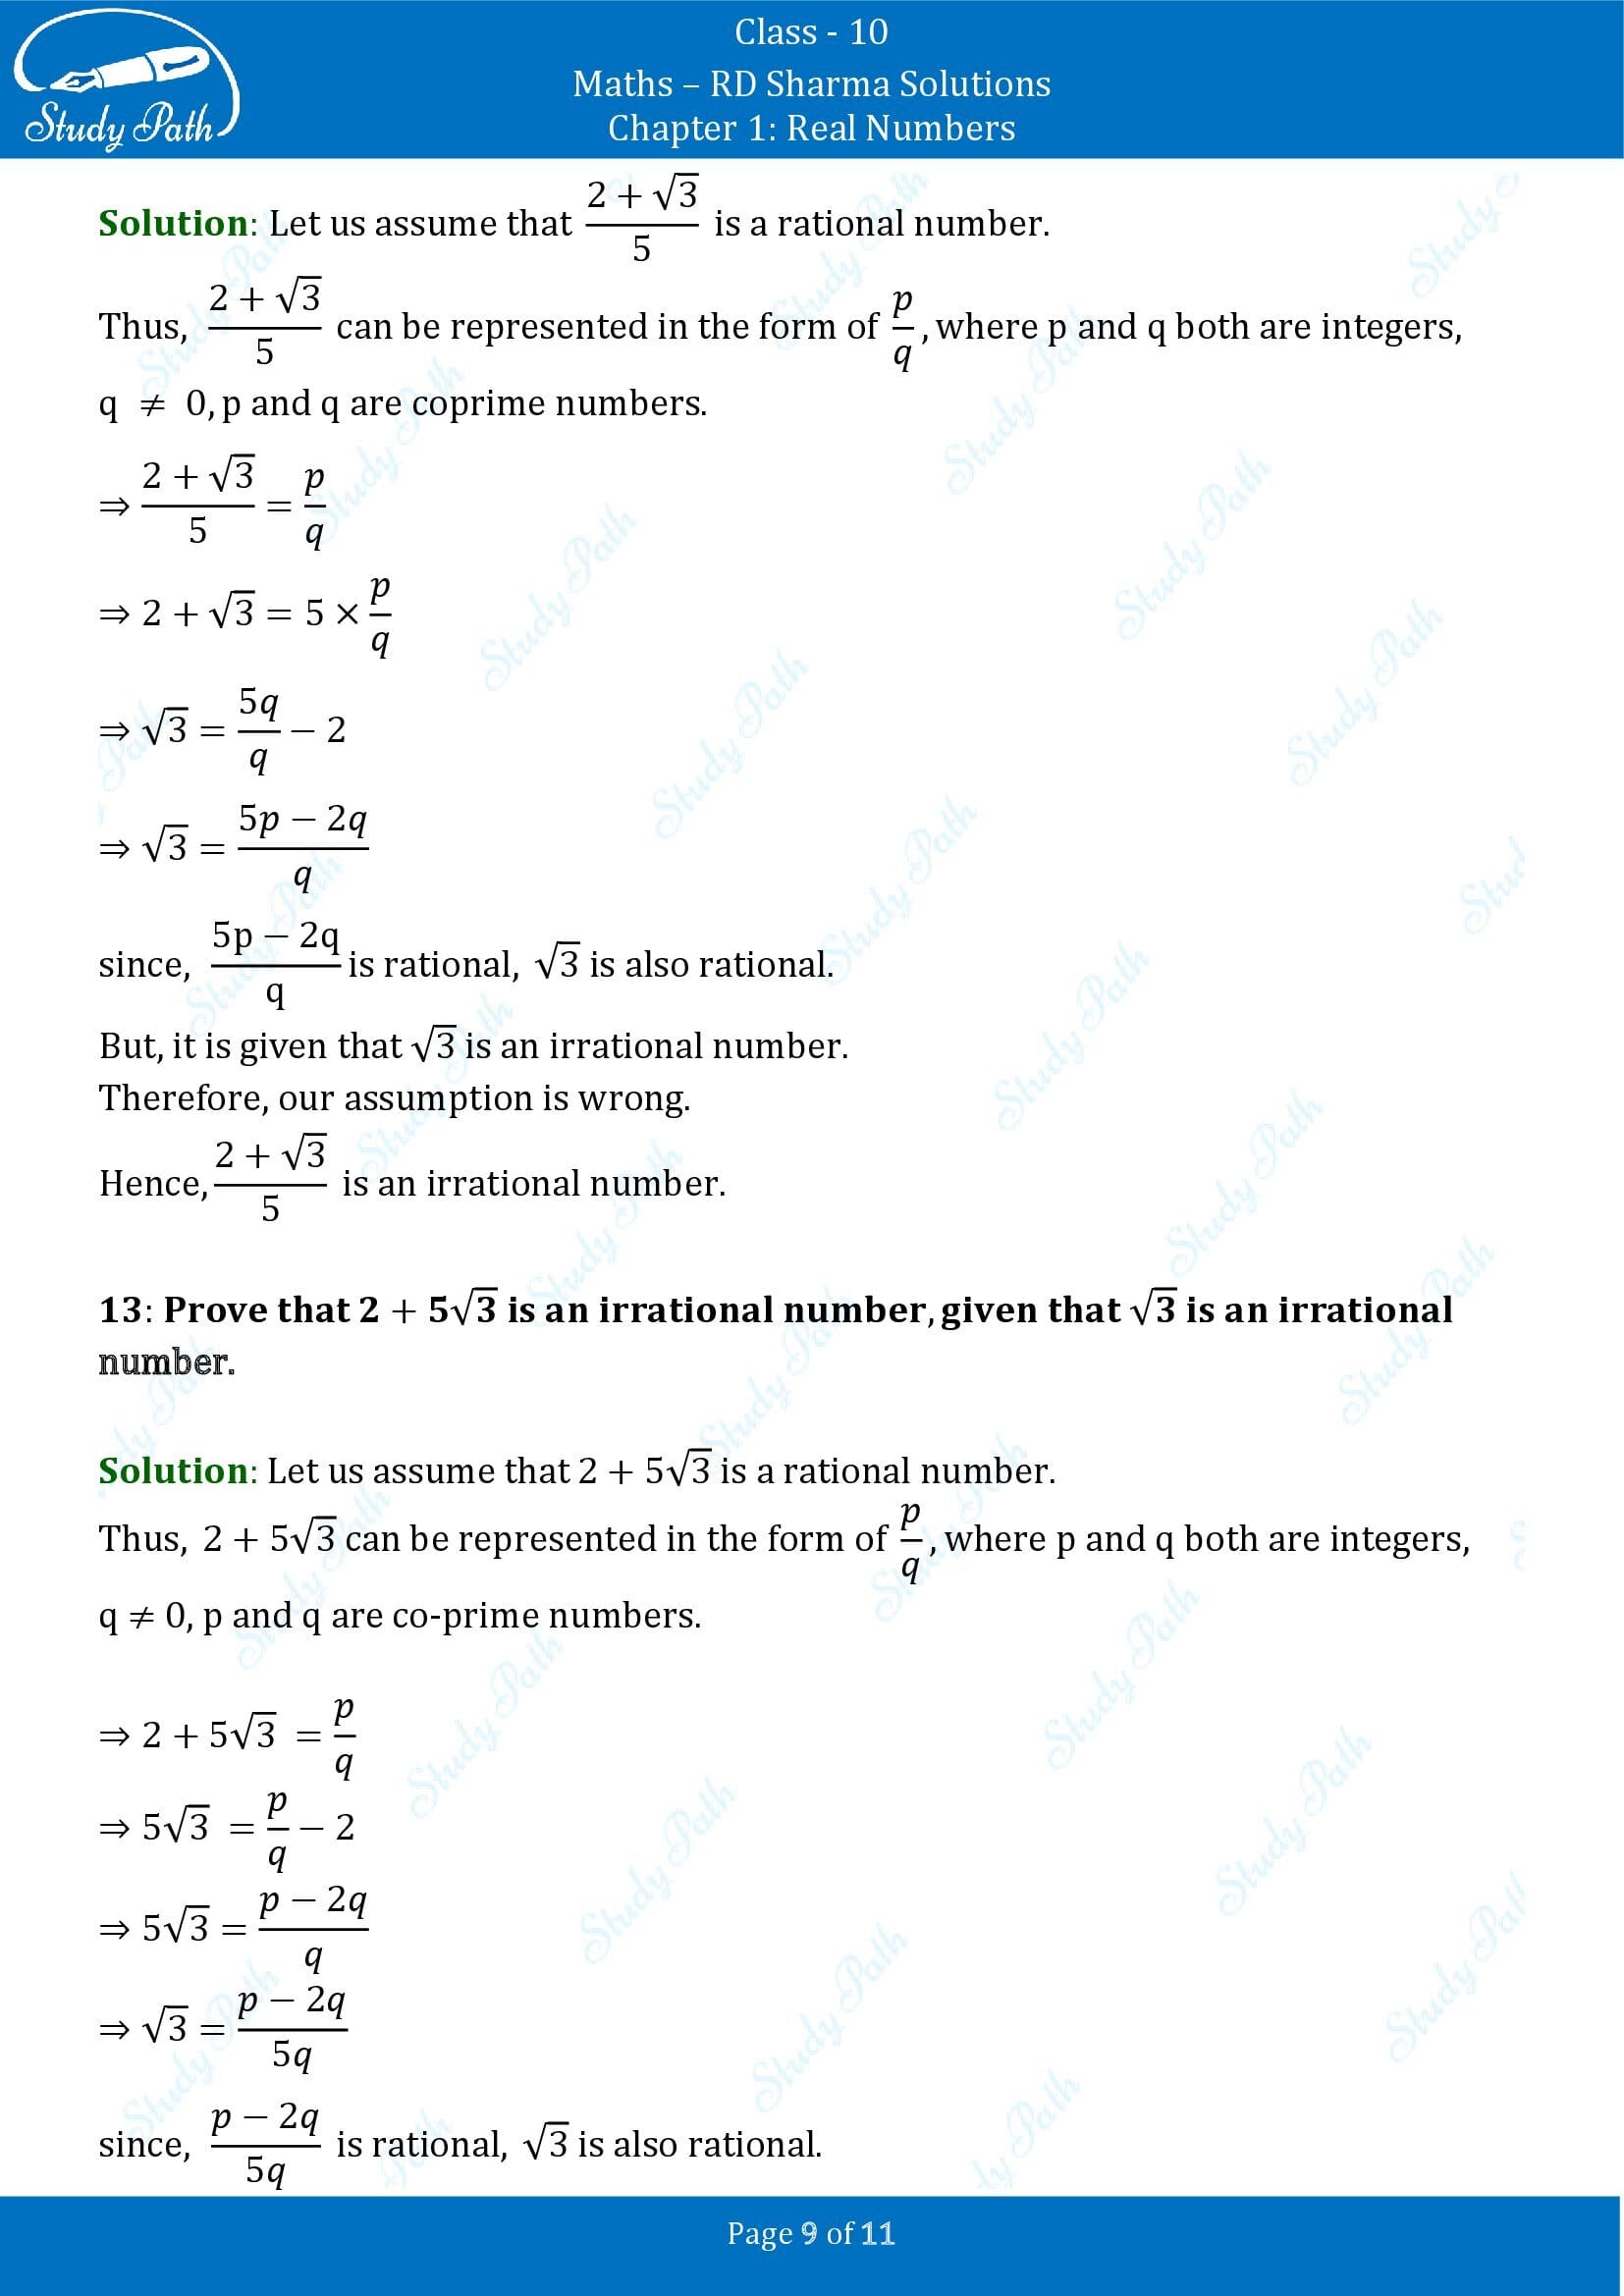 RD Sharma Solutions Class 10 Chapter 1 Real Numbers Exercise 1.5 00009